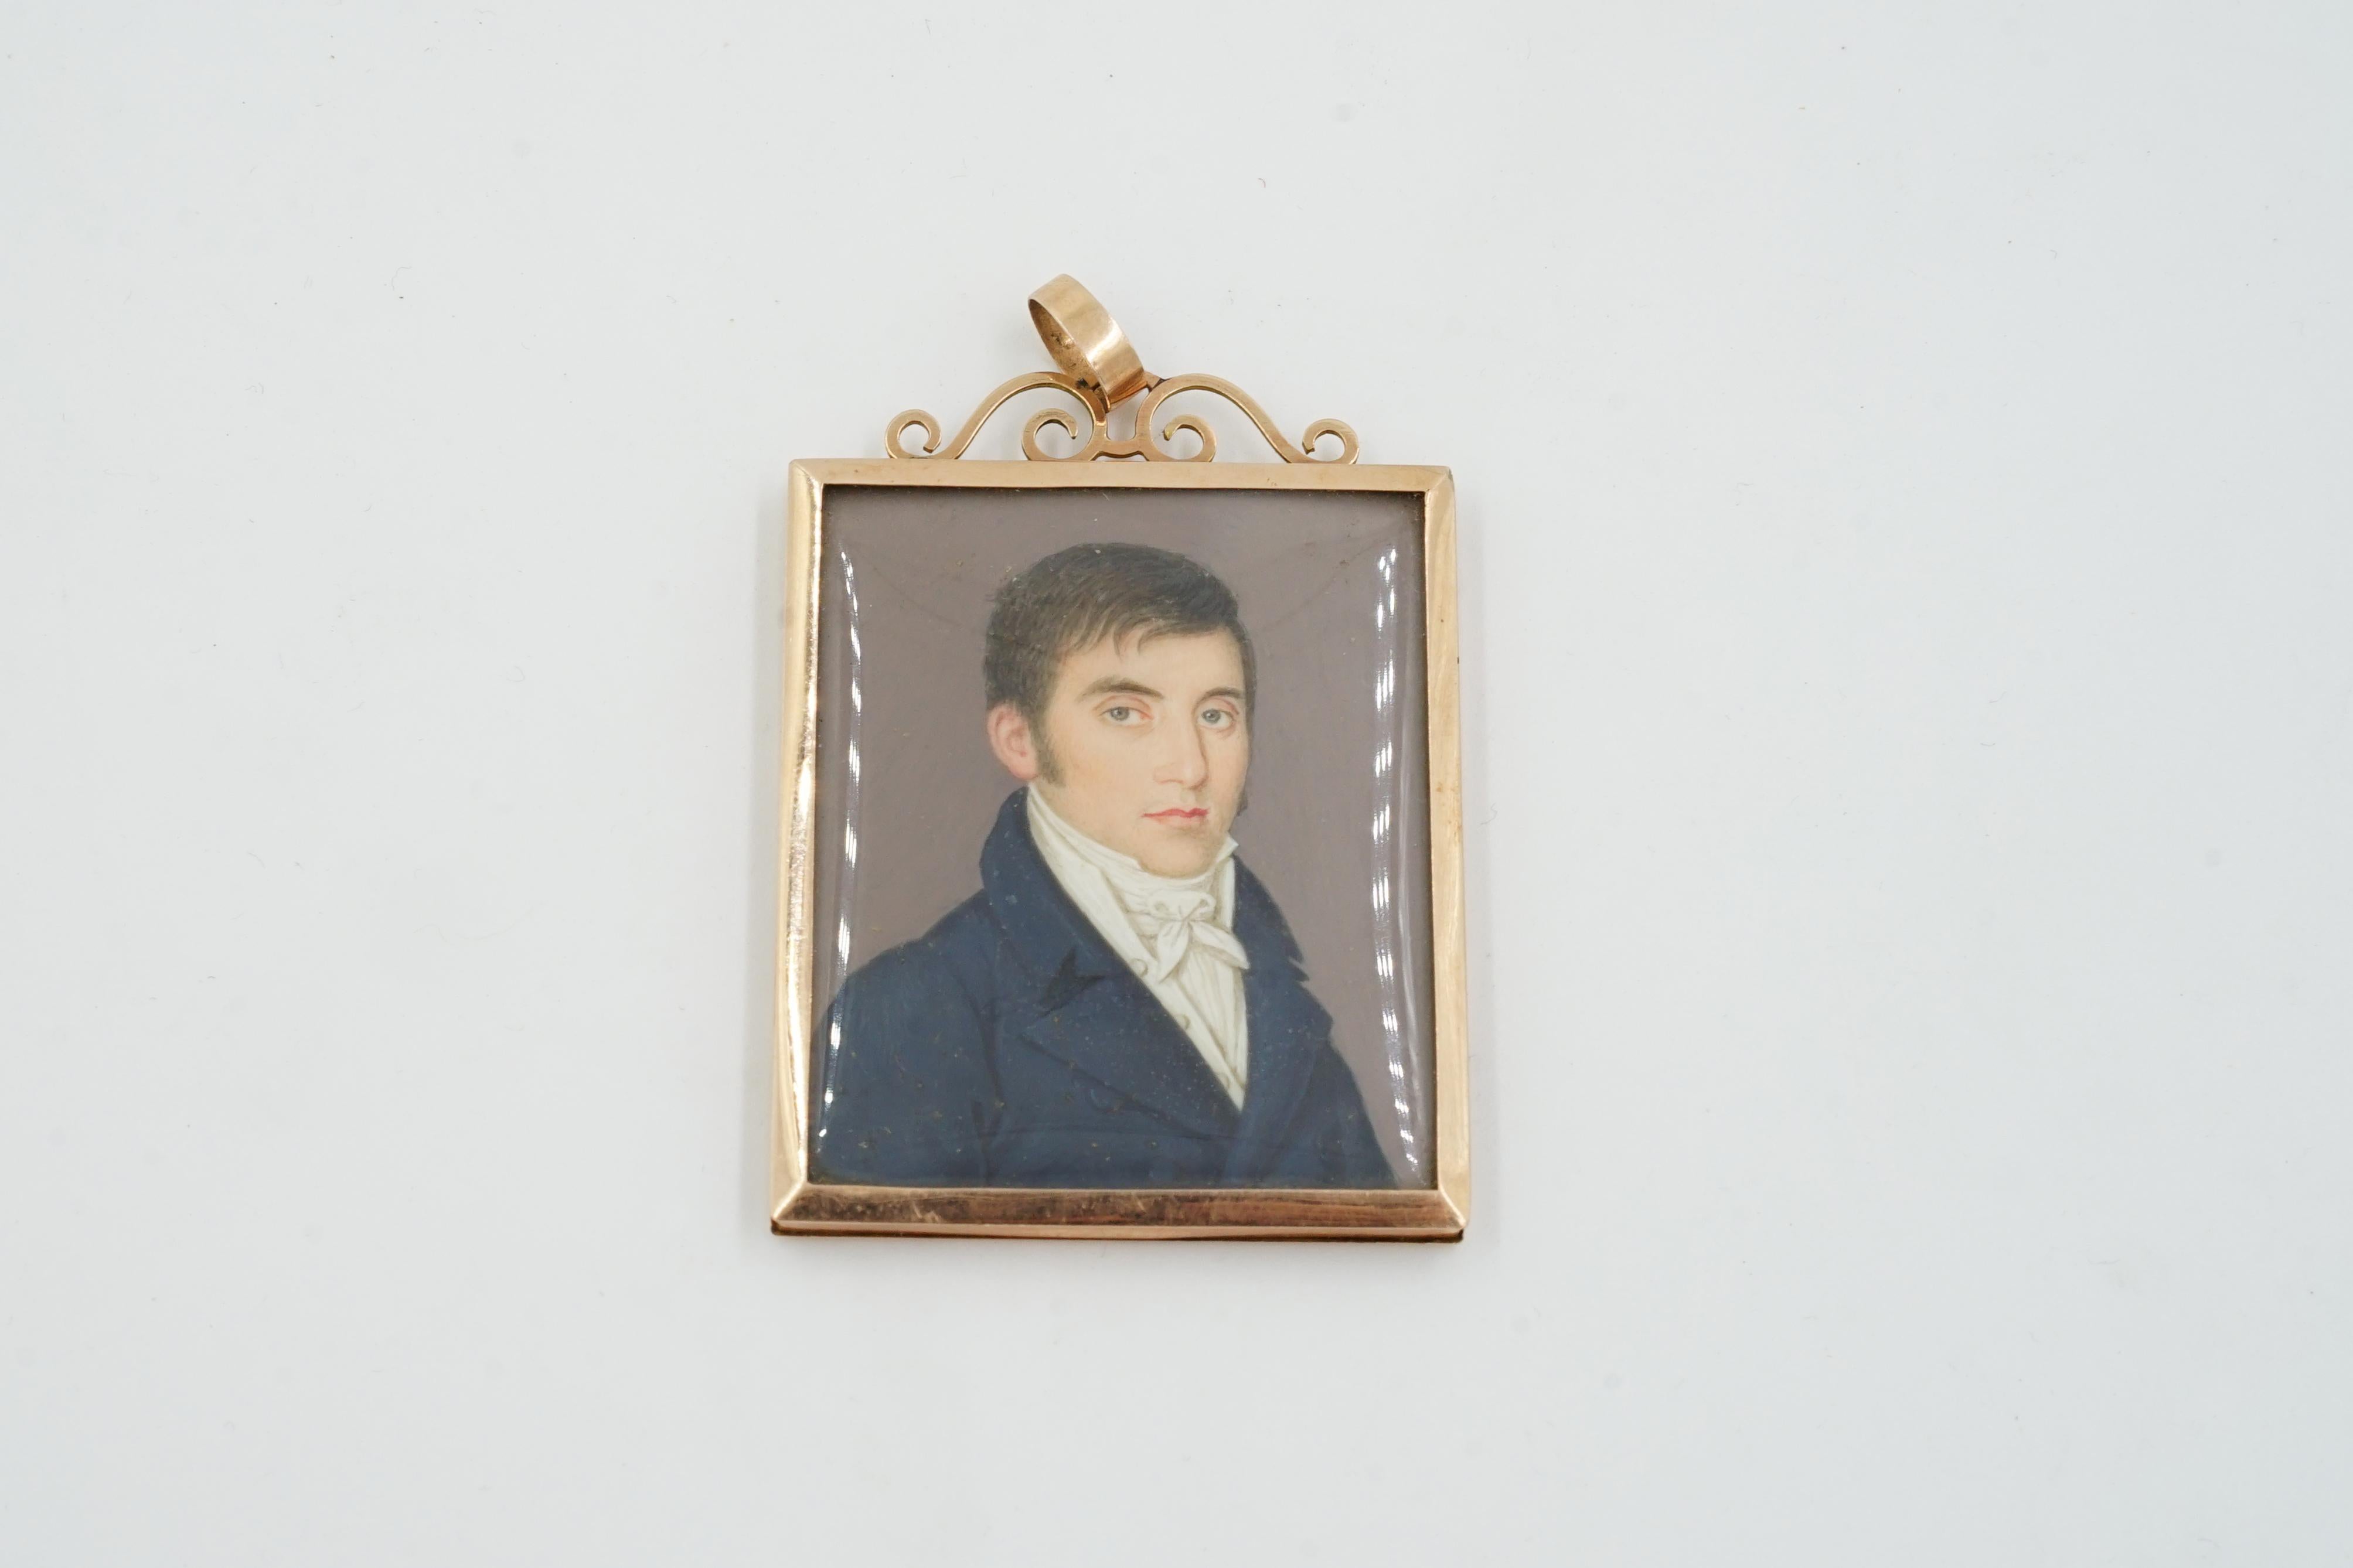 Mid-19th Century Miniature portrait framed in gold